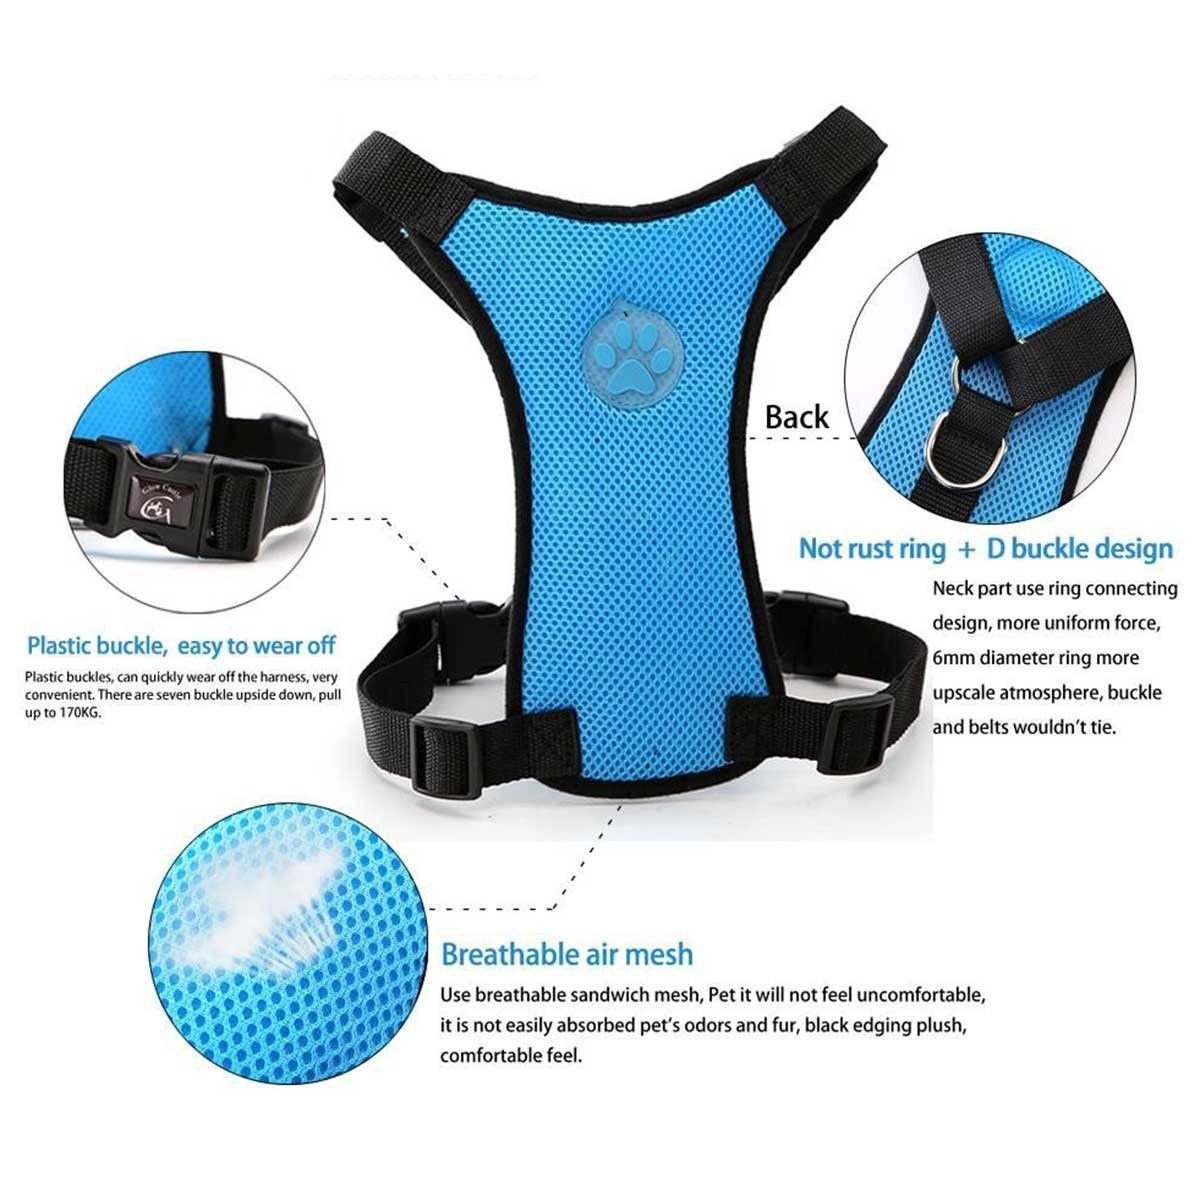 High Quality Soft Mesh Dog Harness-DogsTailCircle